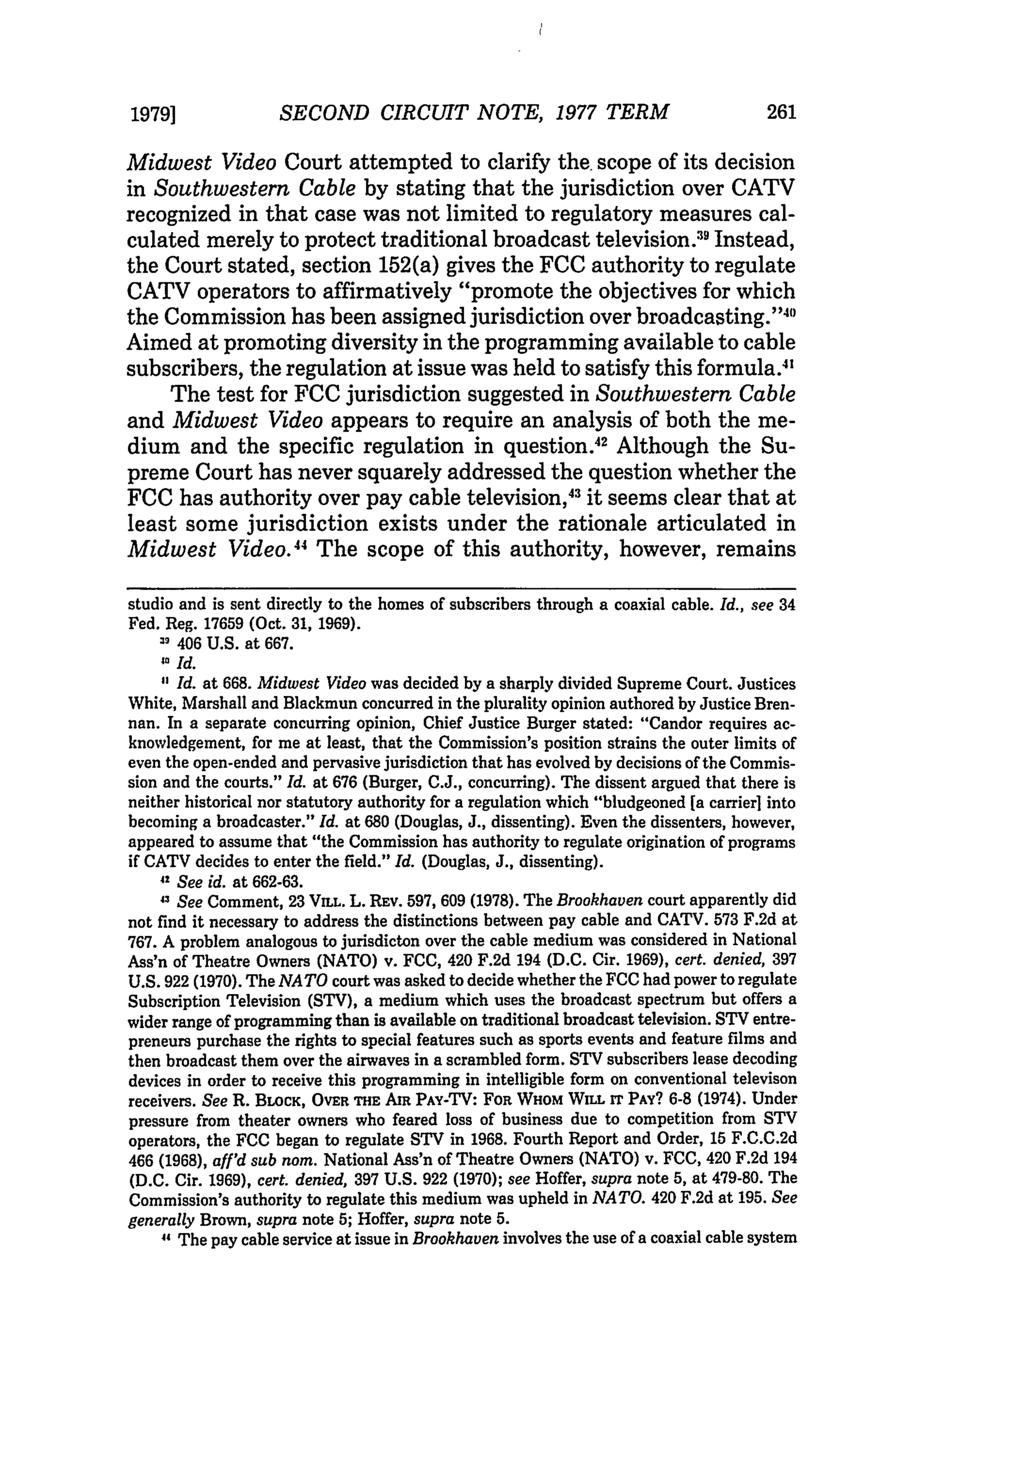 1979] SECOND CIRCUIT NOTE, 1977 TERM Midwest Video Court attempted to clarify the scope of its decision in Southwestern Cable by stating that the jurisdiction over CATV recognized in that case was